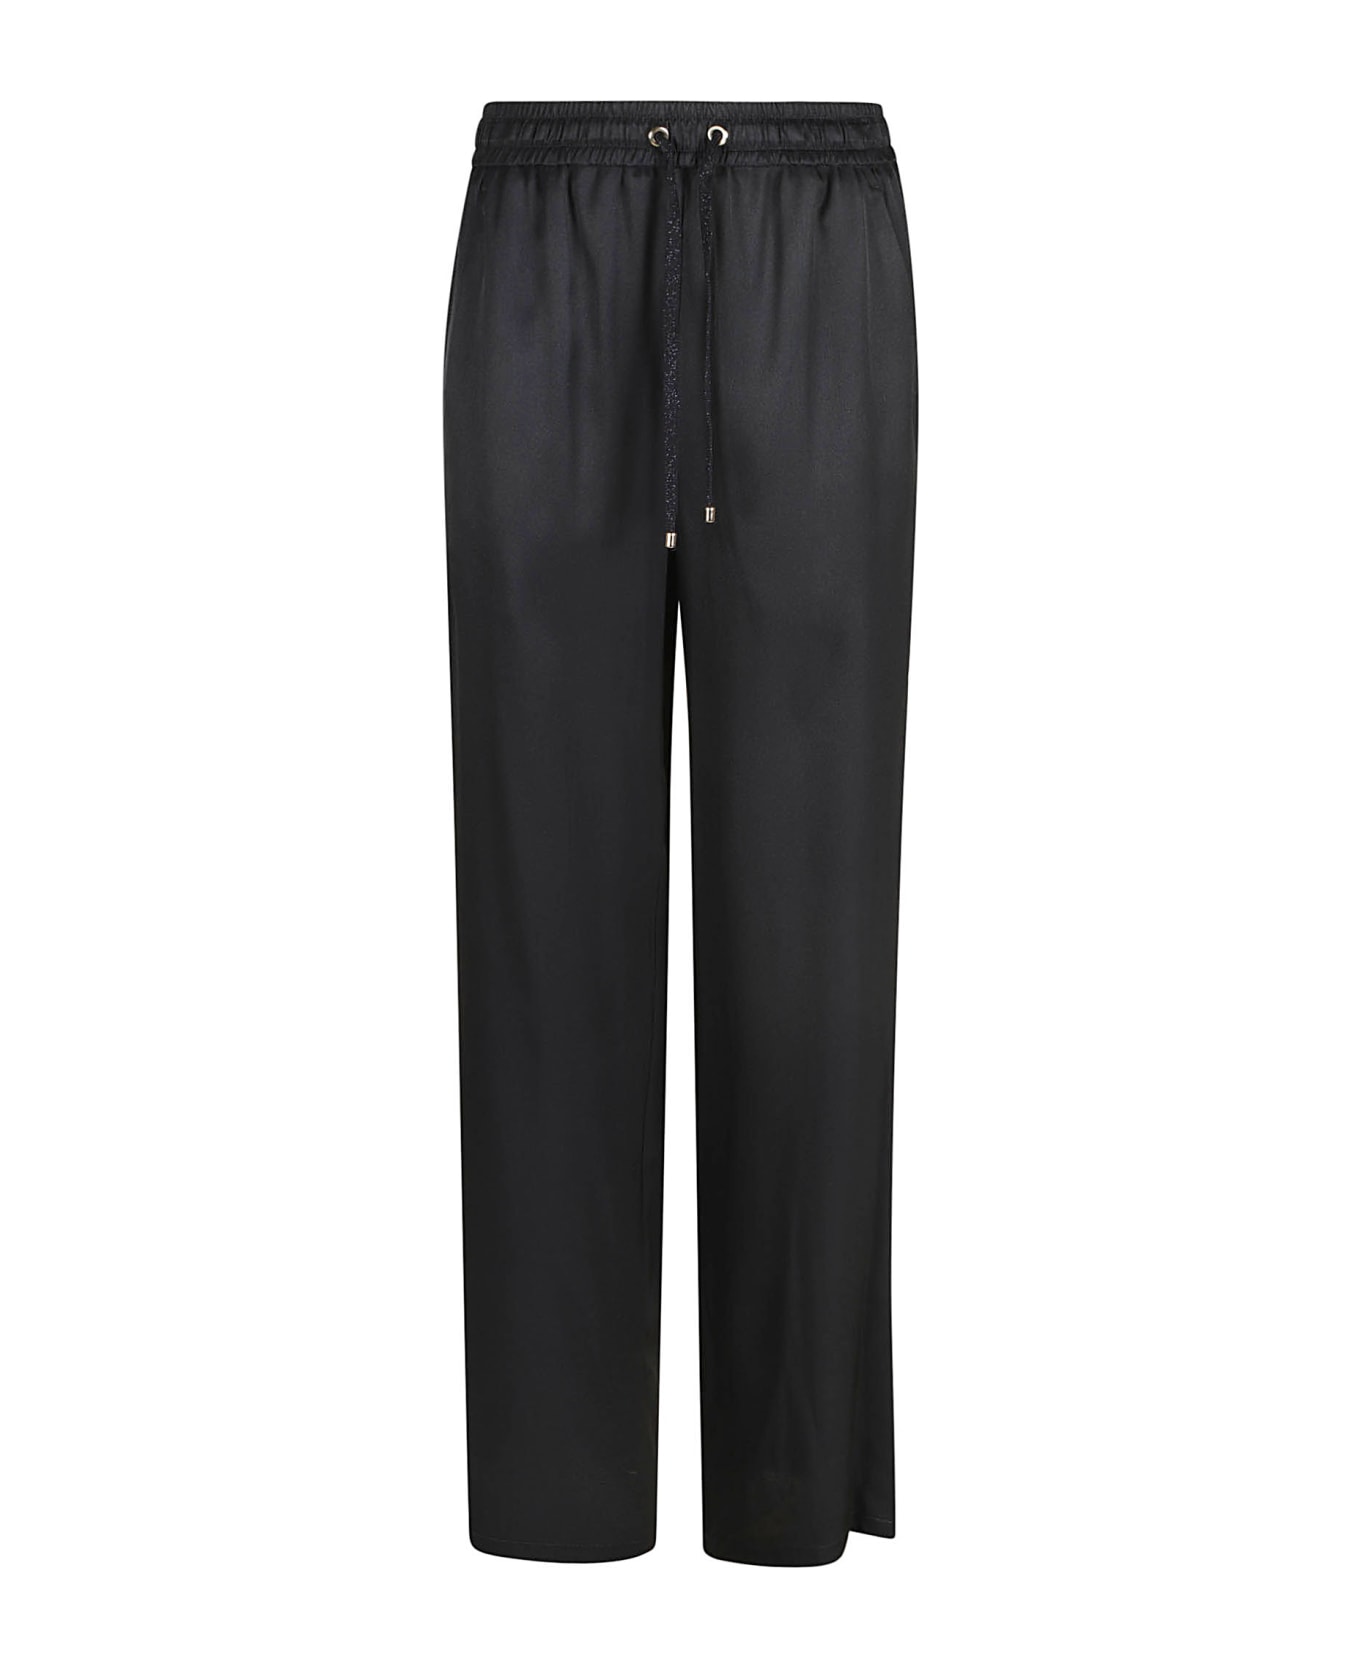 Lorena Antoniazzi Laced Trousers - Blue ボトムス